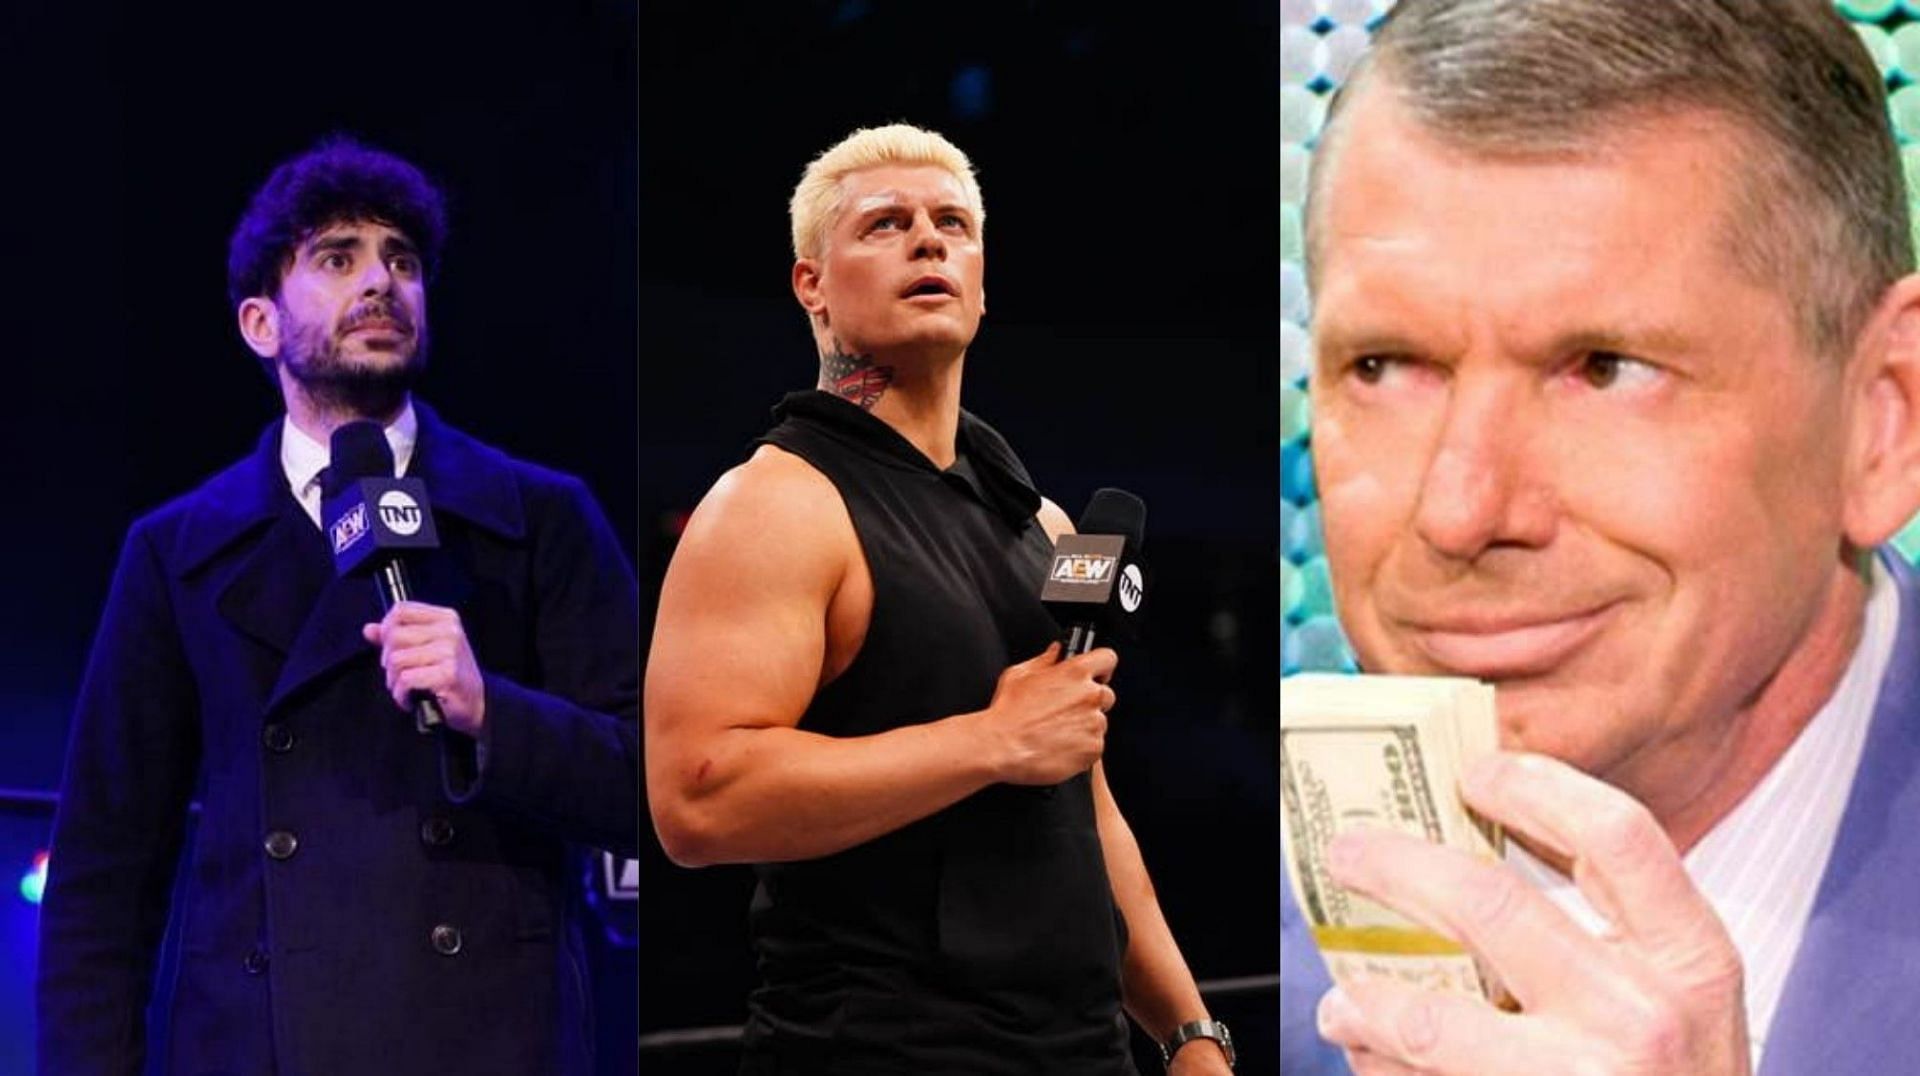 Wrestling legend believes WWE outbid Tony Khan to potentially bring in Cody Rhodes